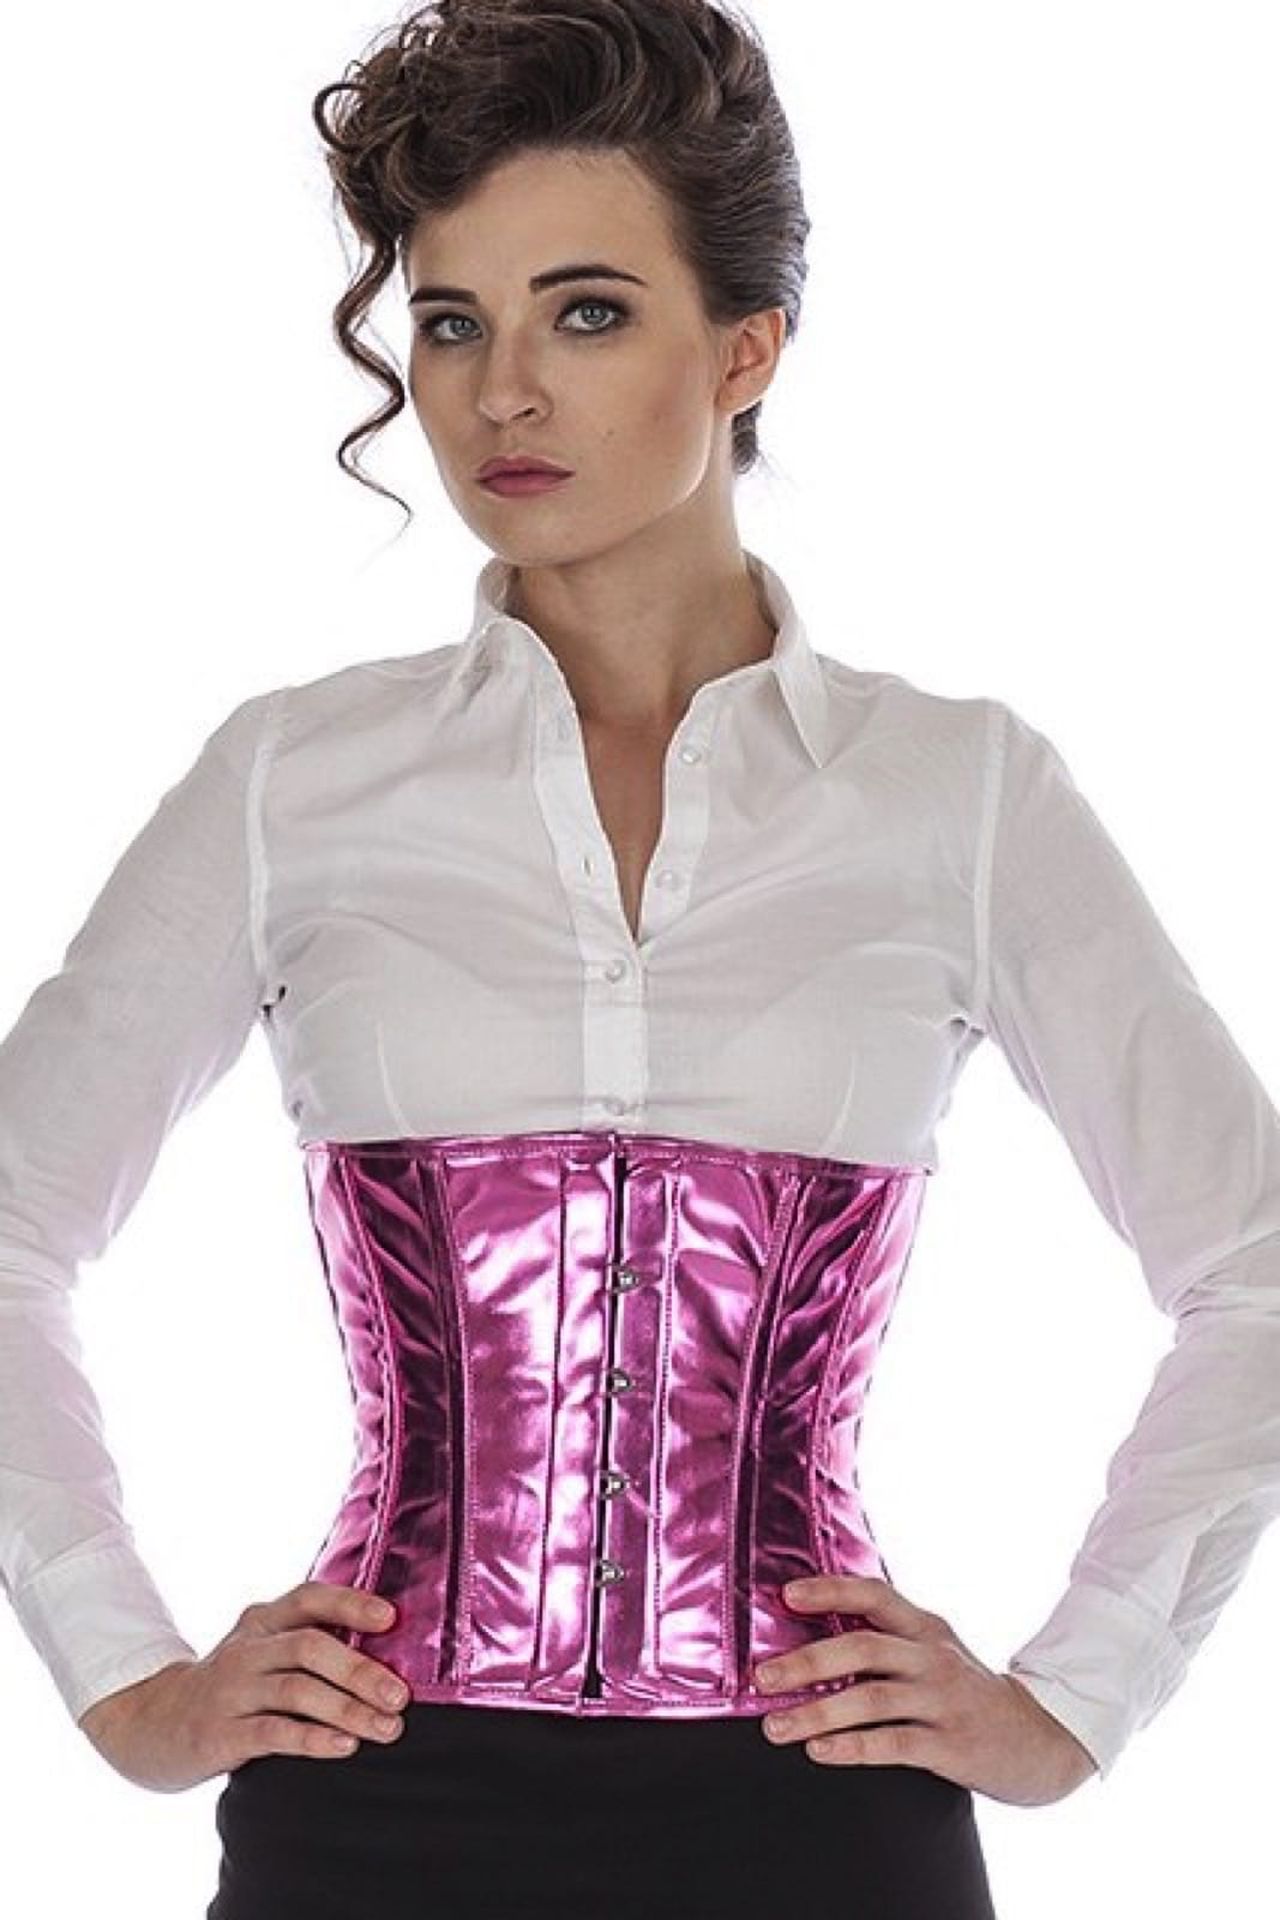 Corse pink glitter charol reductores corset pwG7